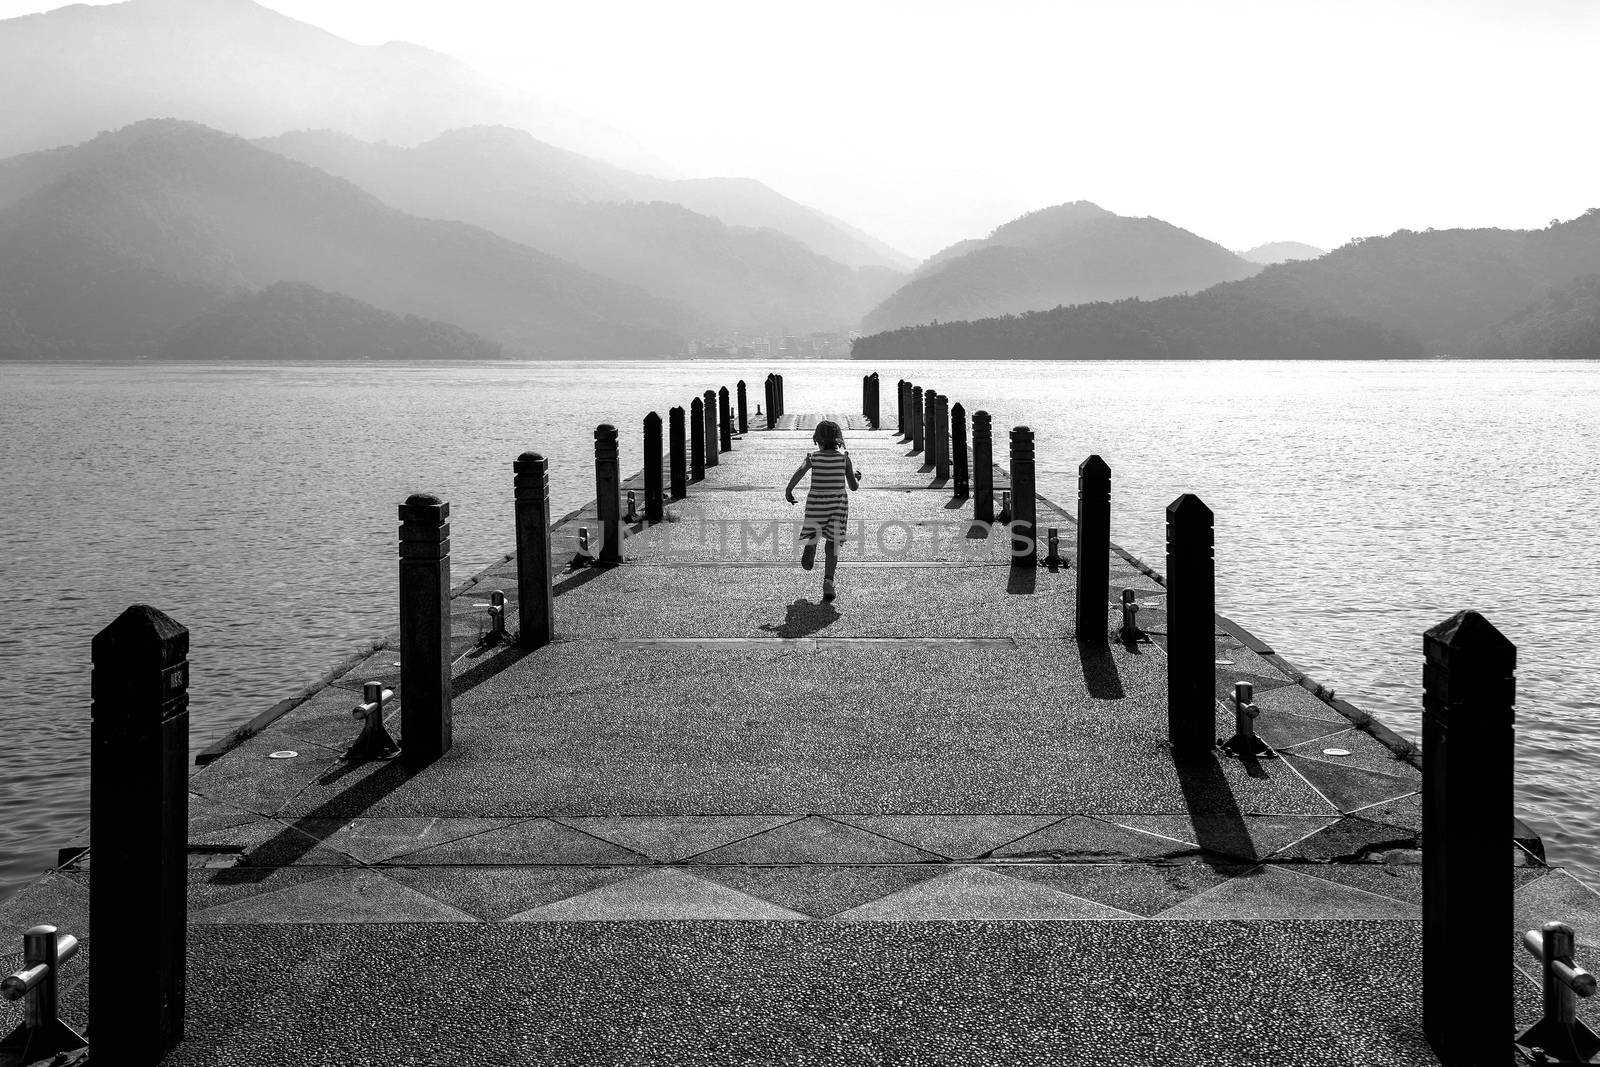 Black and white of Little girl running on pathway in Sun moon lake, Taiwan.